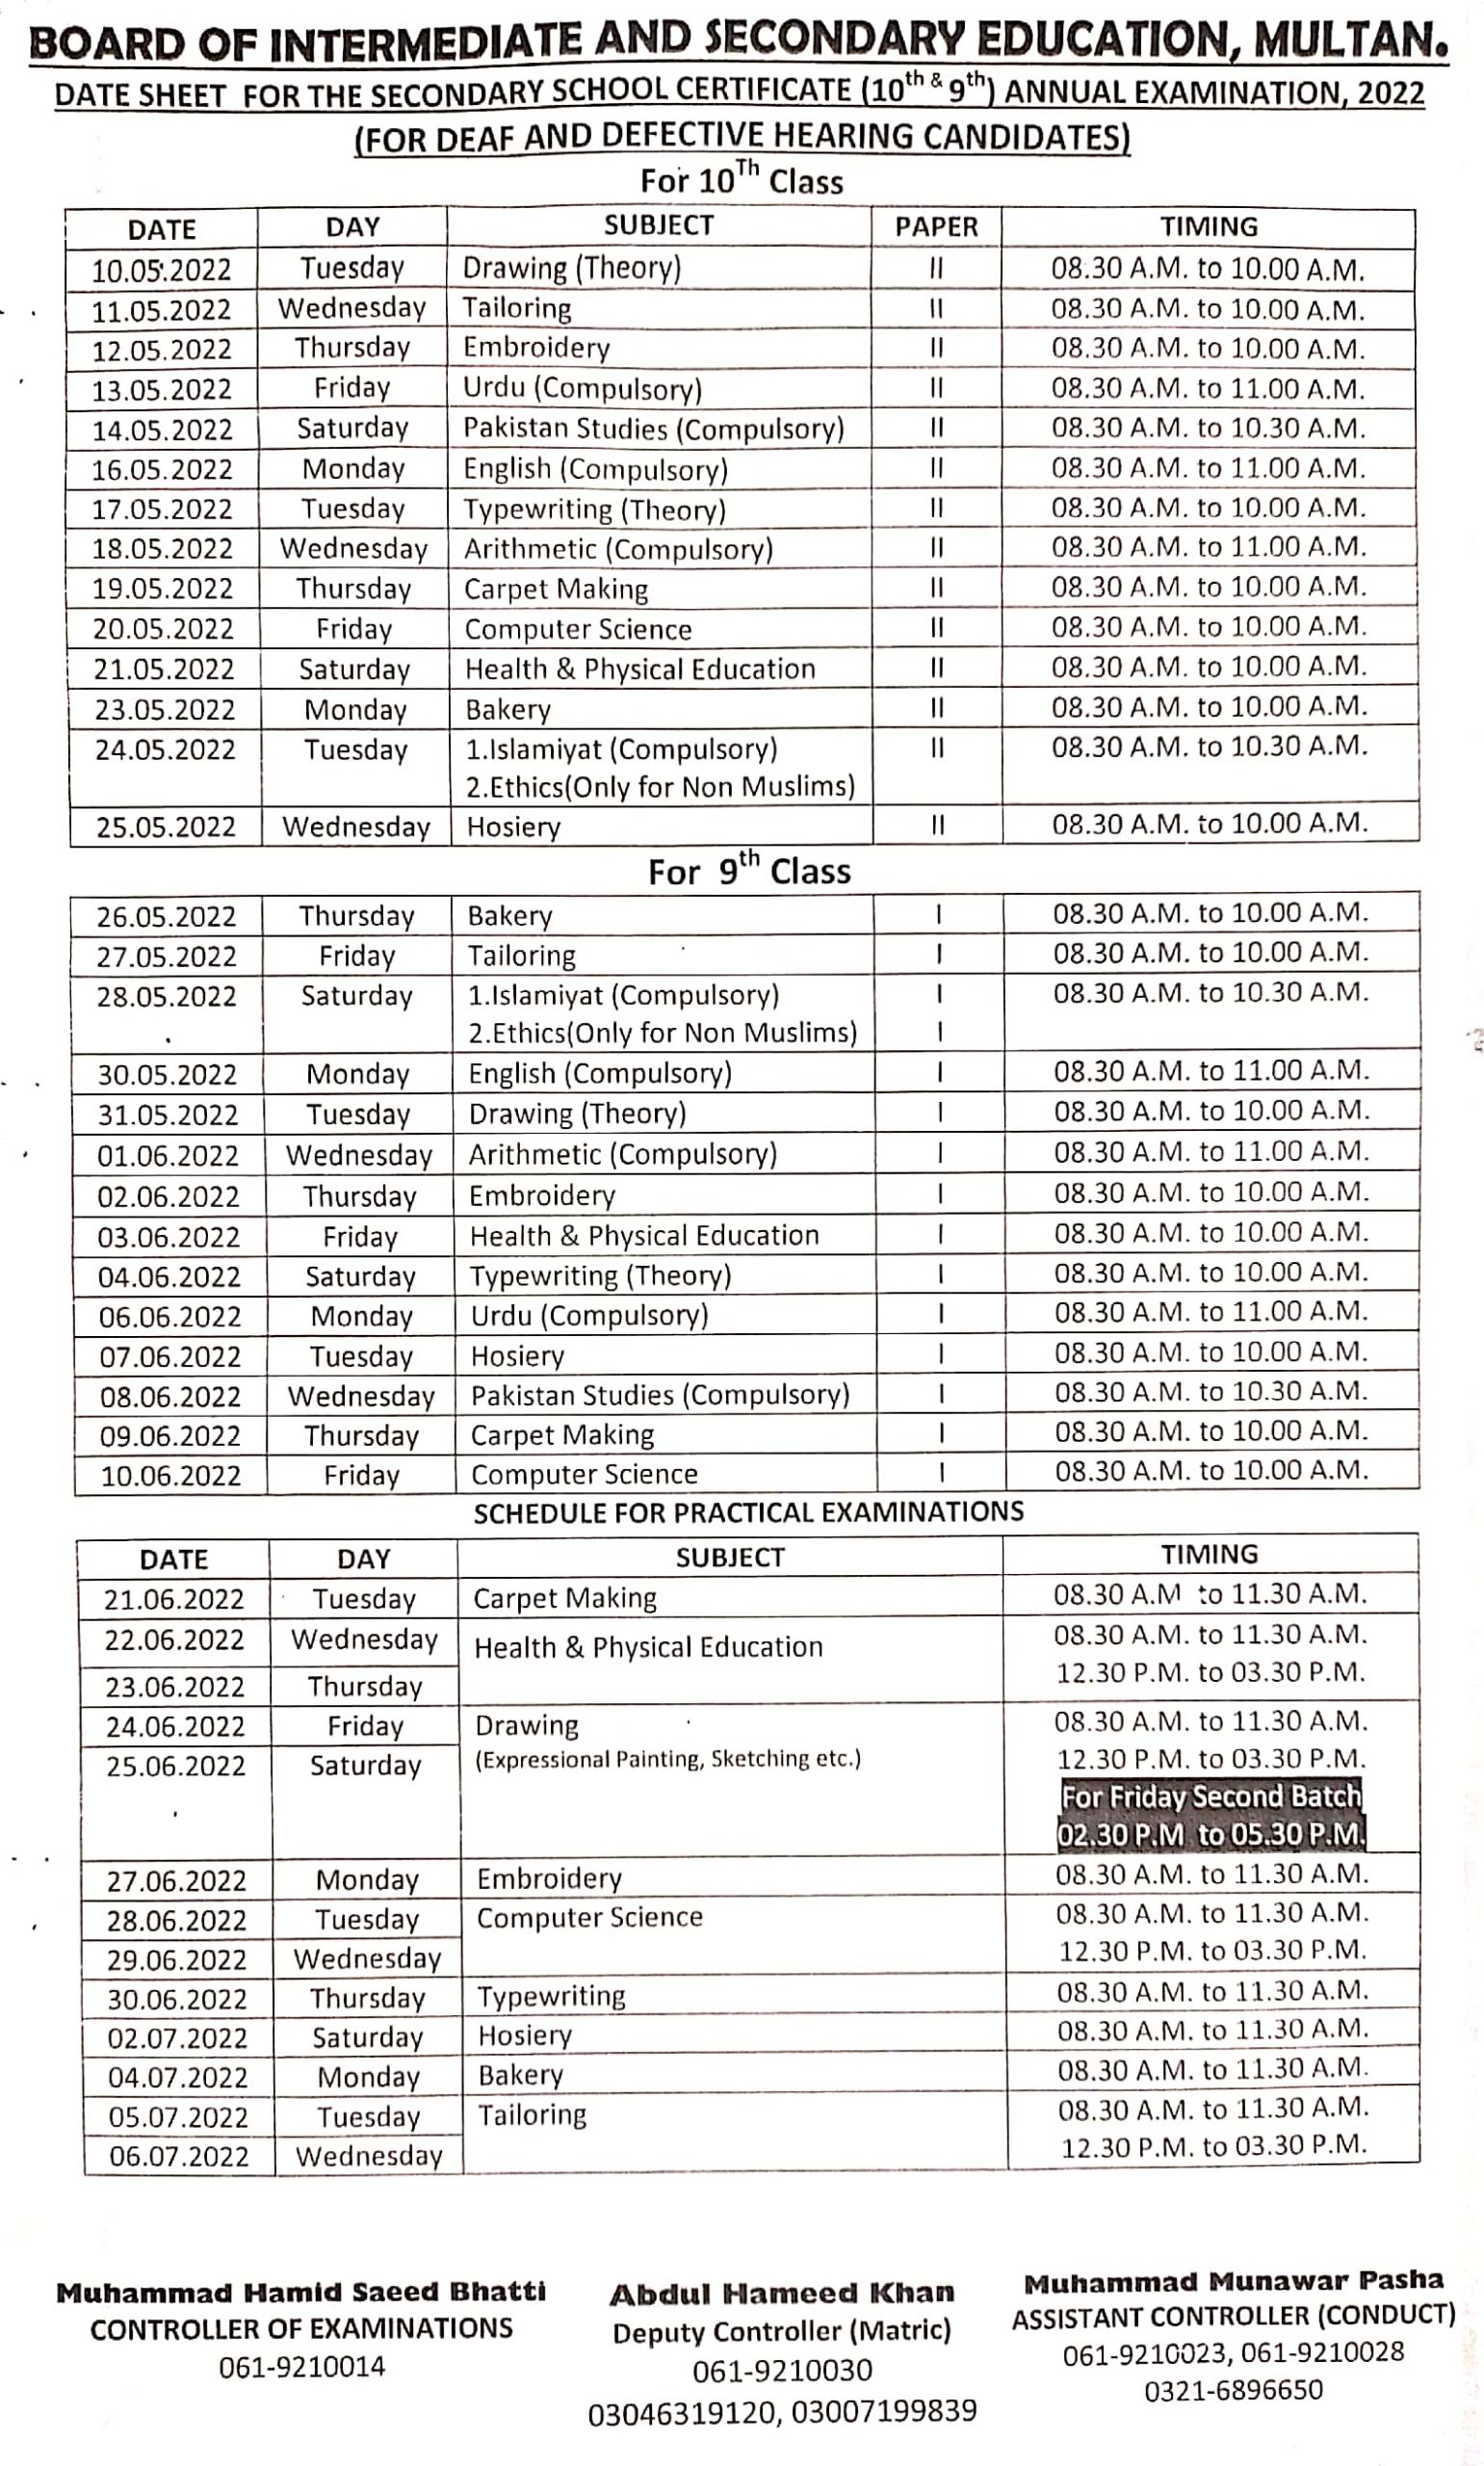 BISE Multan Date Sheet 2022 For Deaf & Defective Hearing Candidates Annual Exam